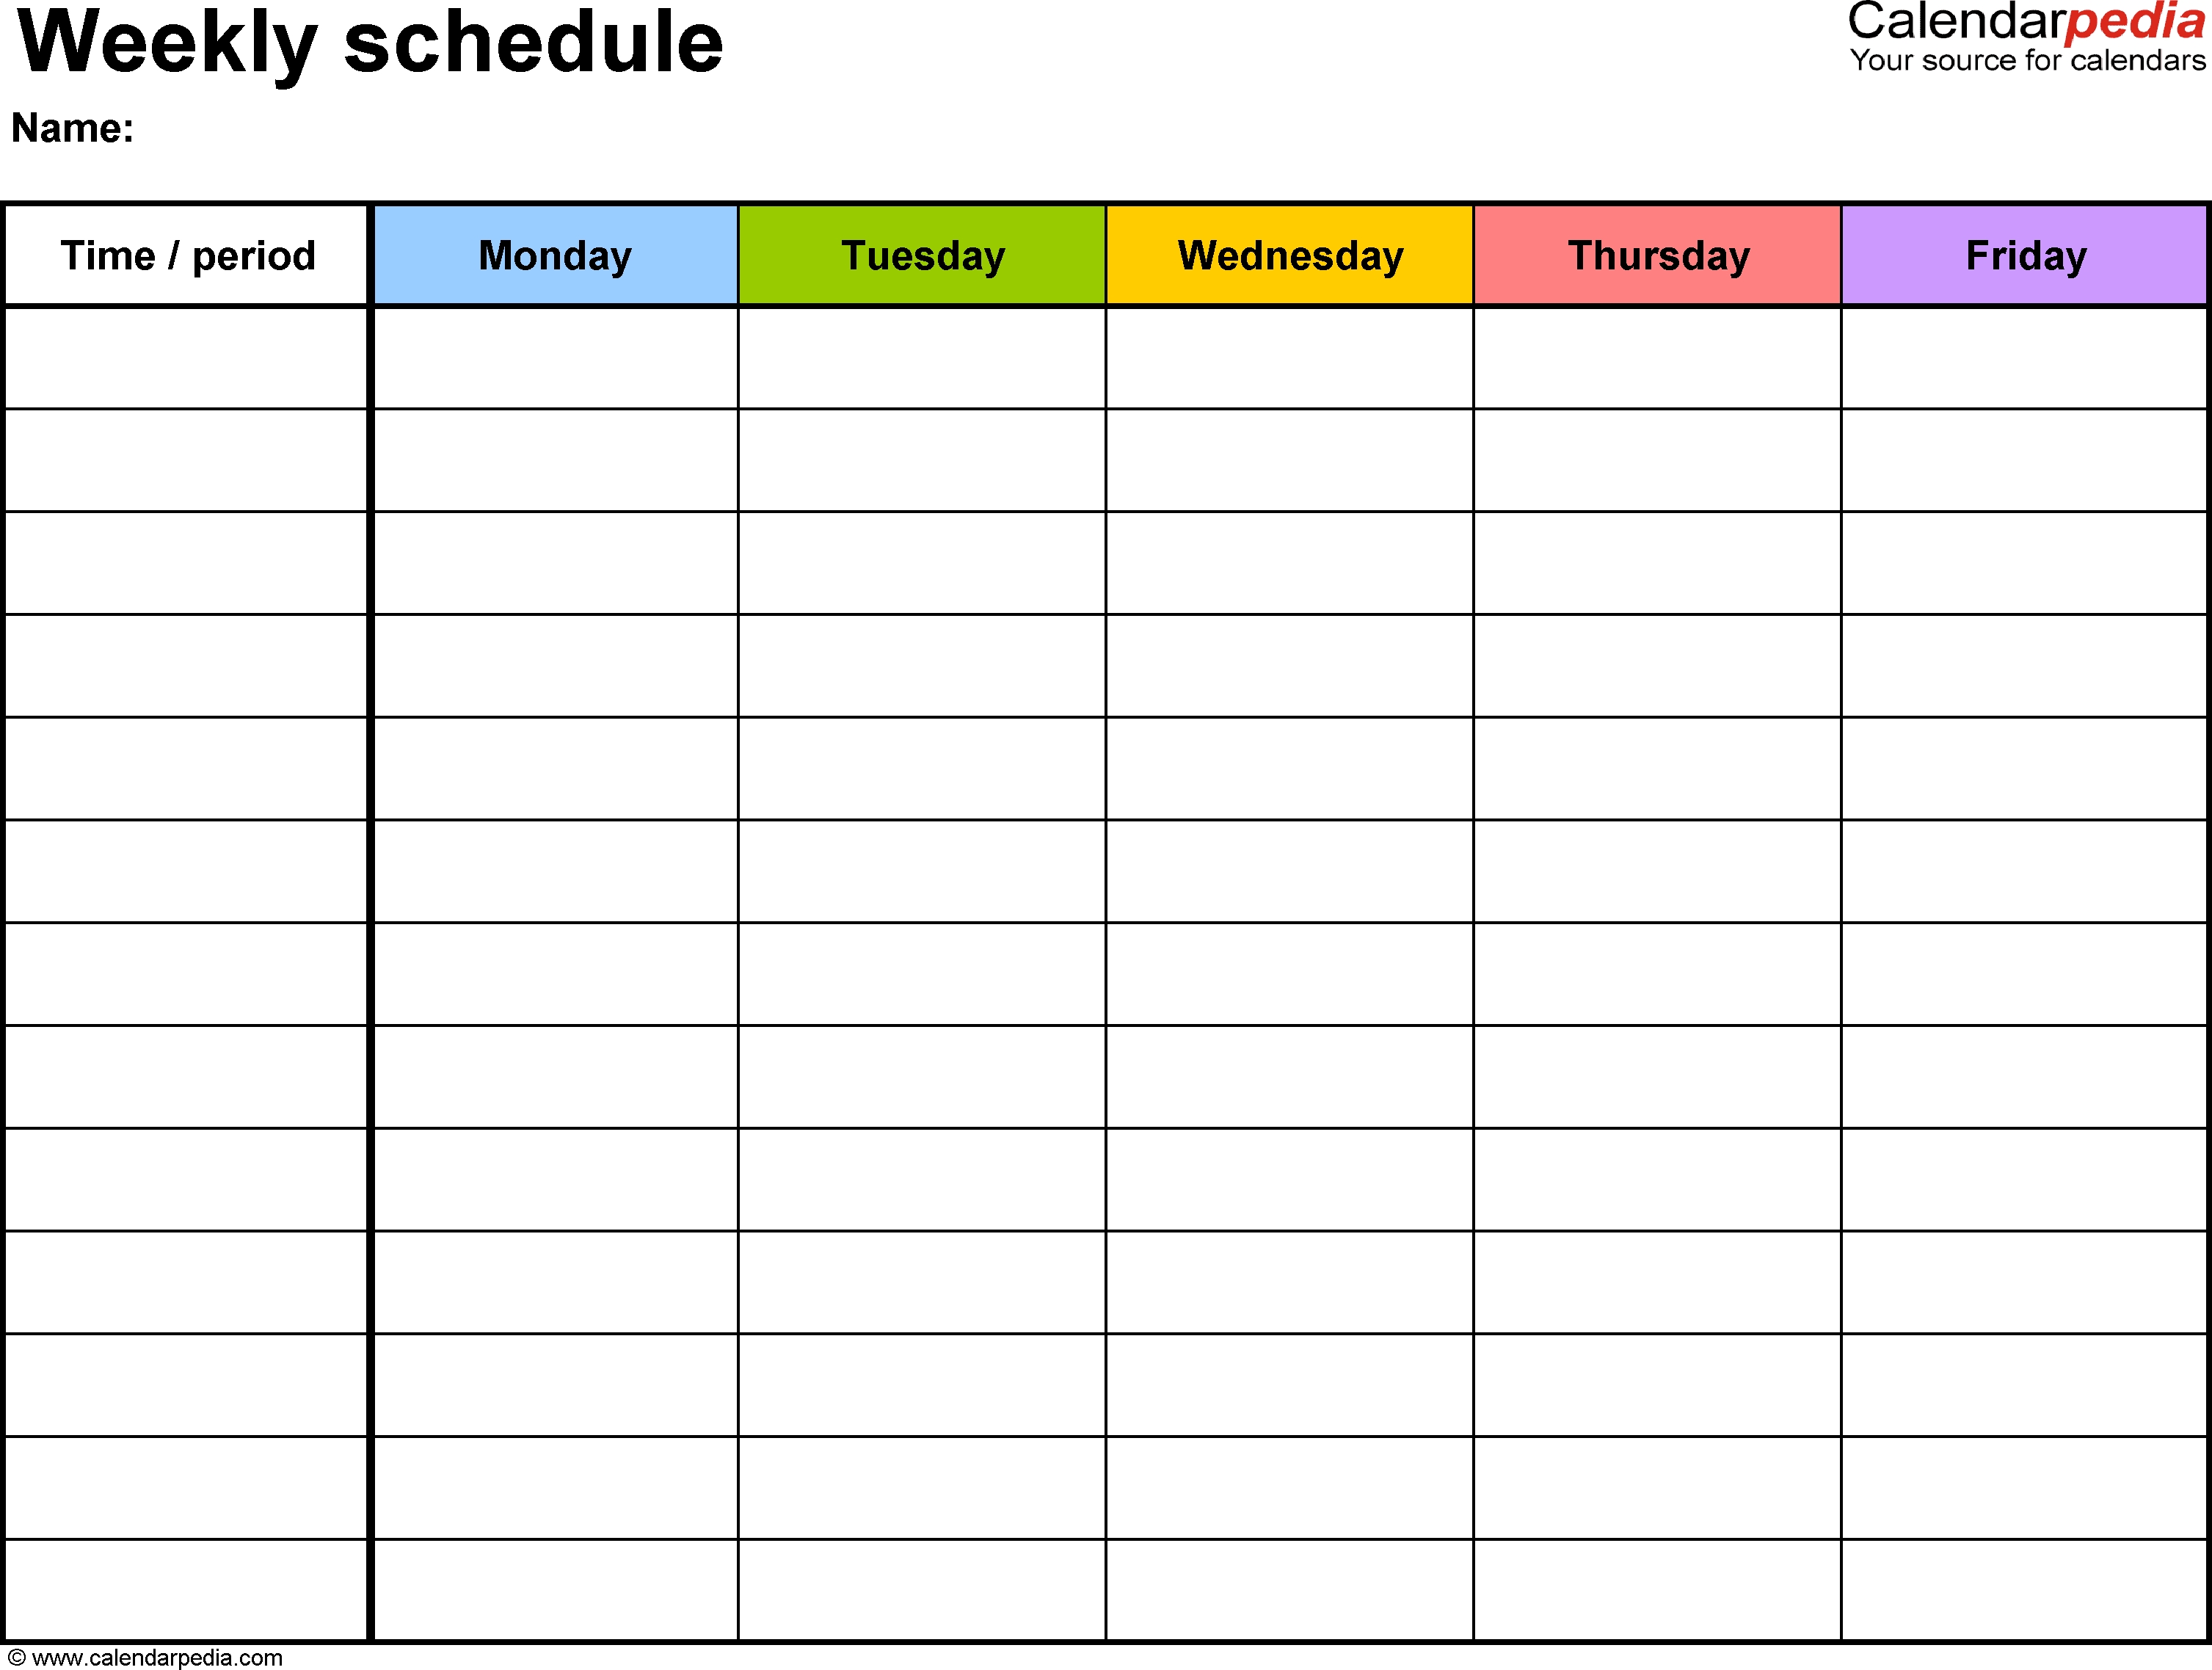 Free Weekly Schedule Templates For Excel - 18 Templates within Type In And Printable Calendar With Hours